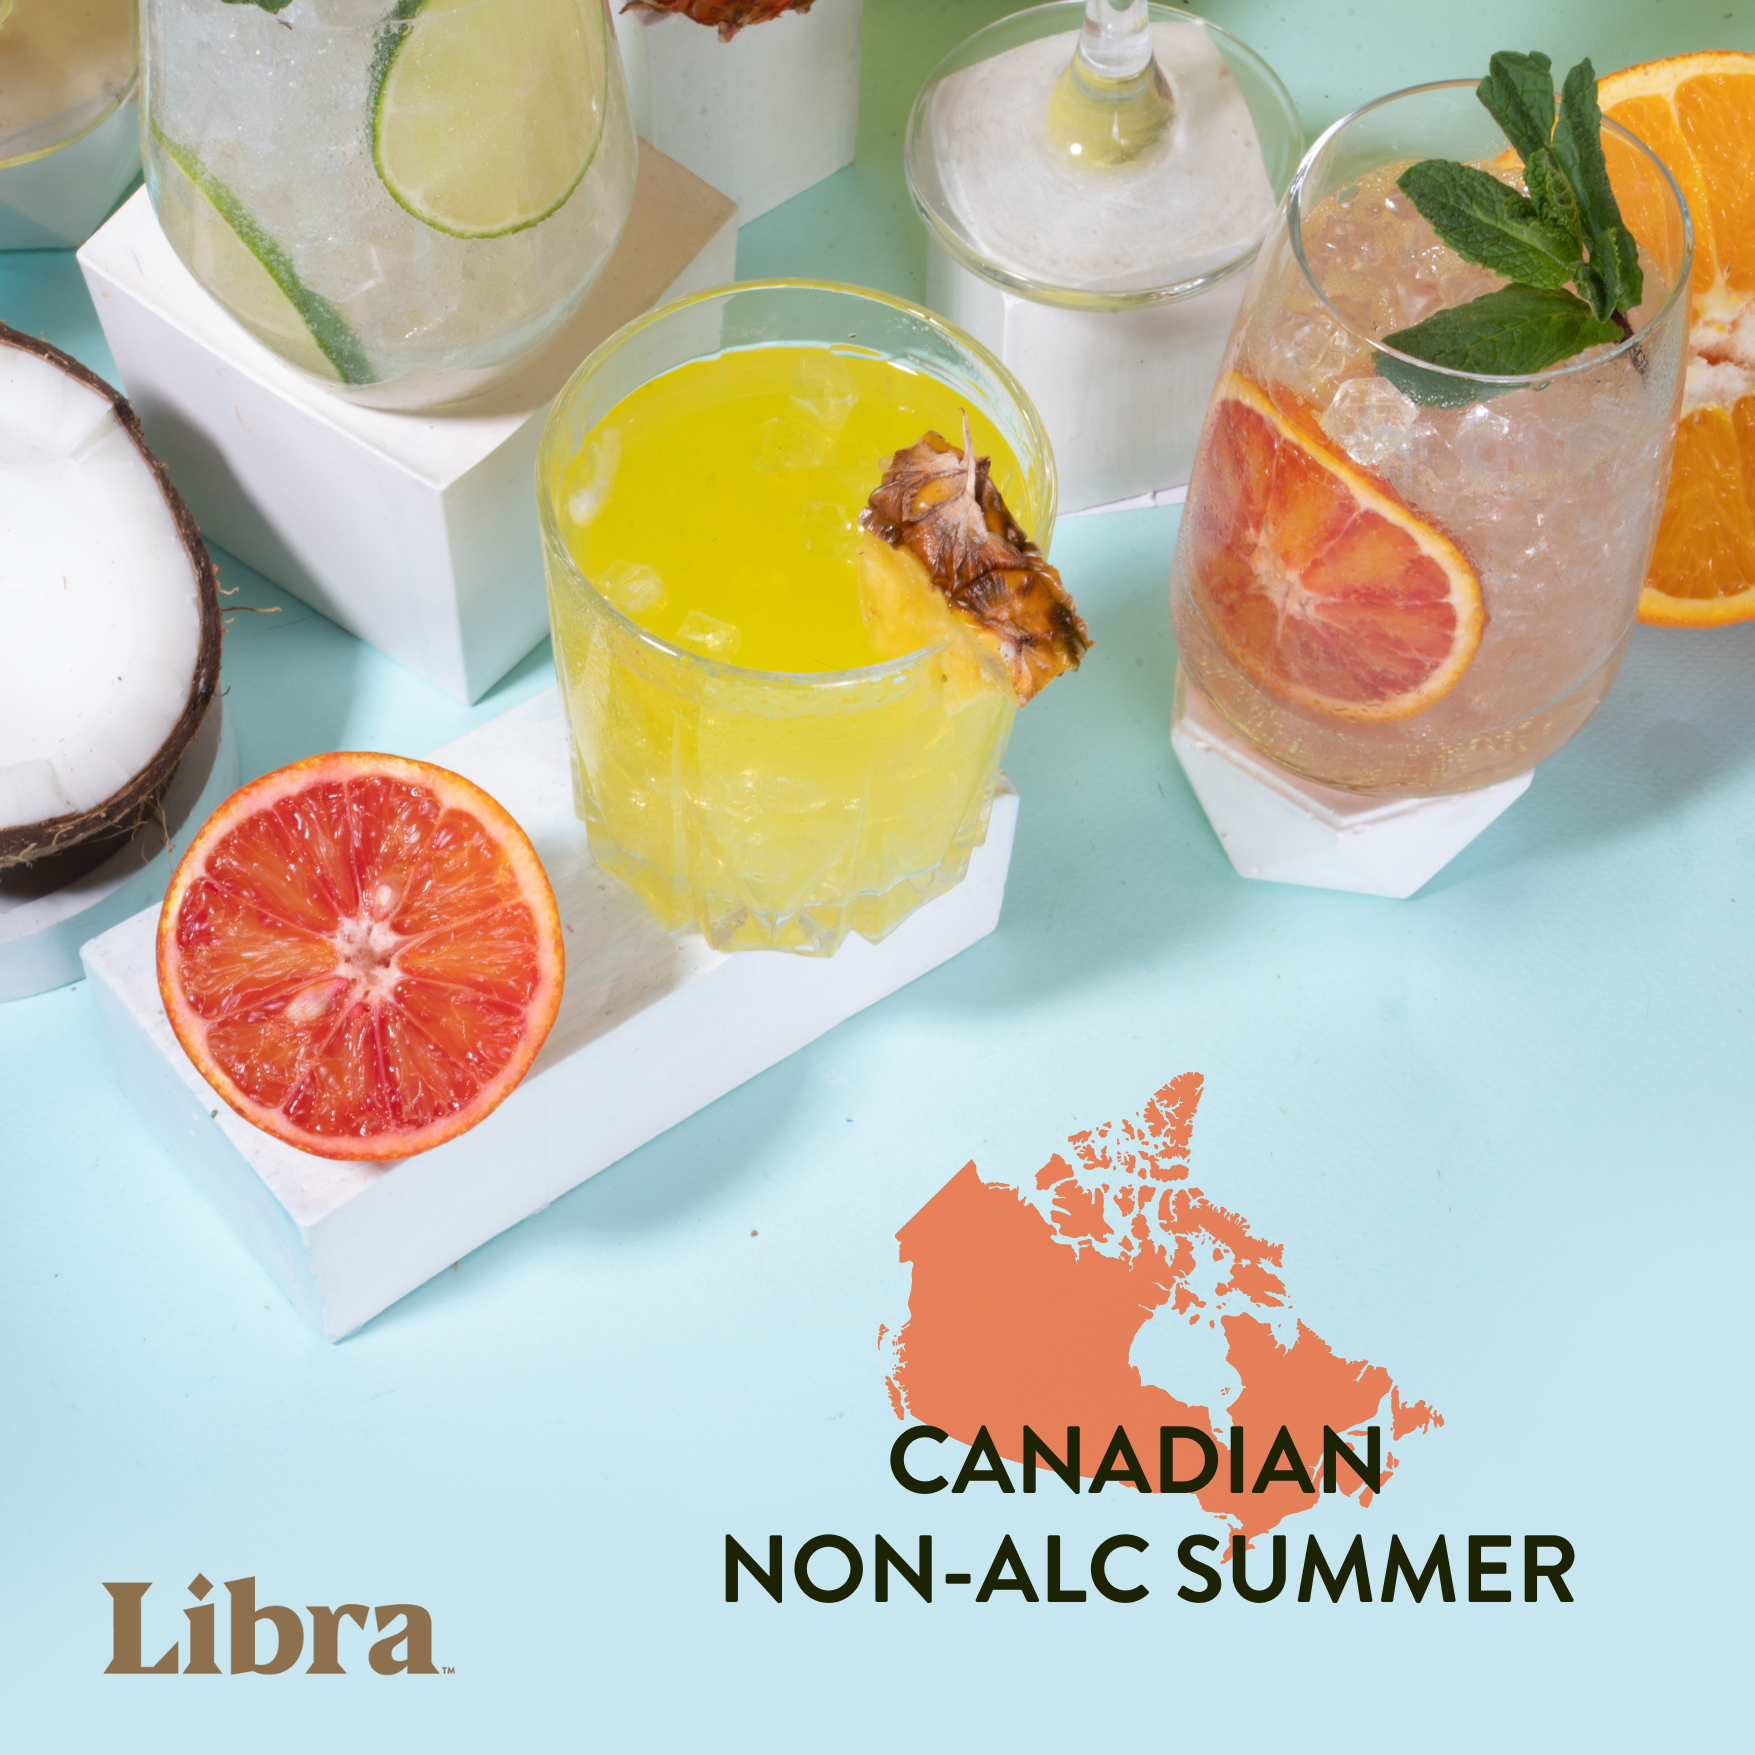 Your Best Canadian Non-Alc Summer Yet 🍁🍹